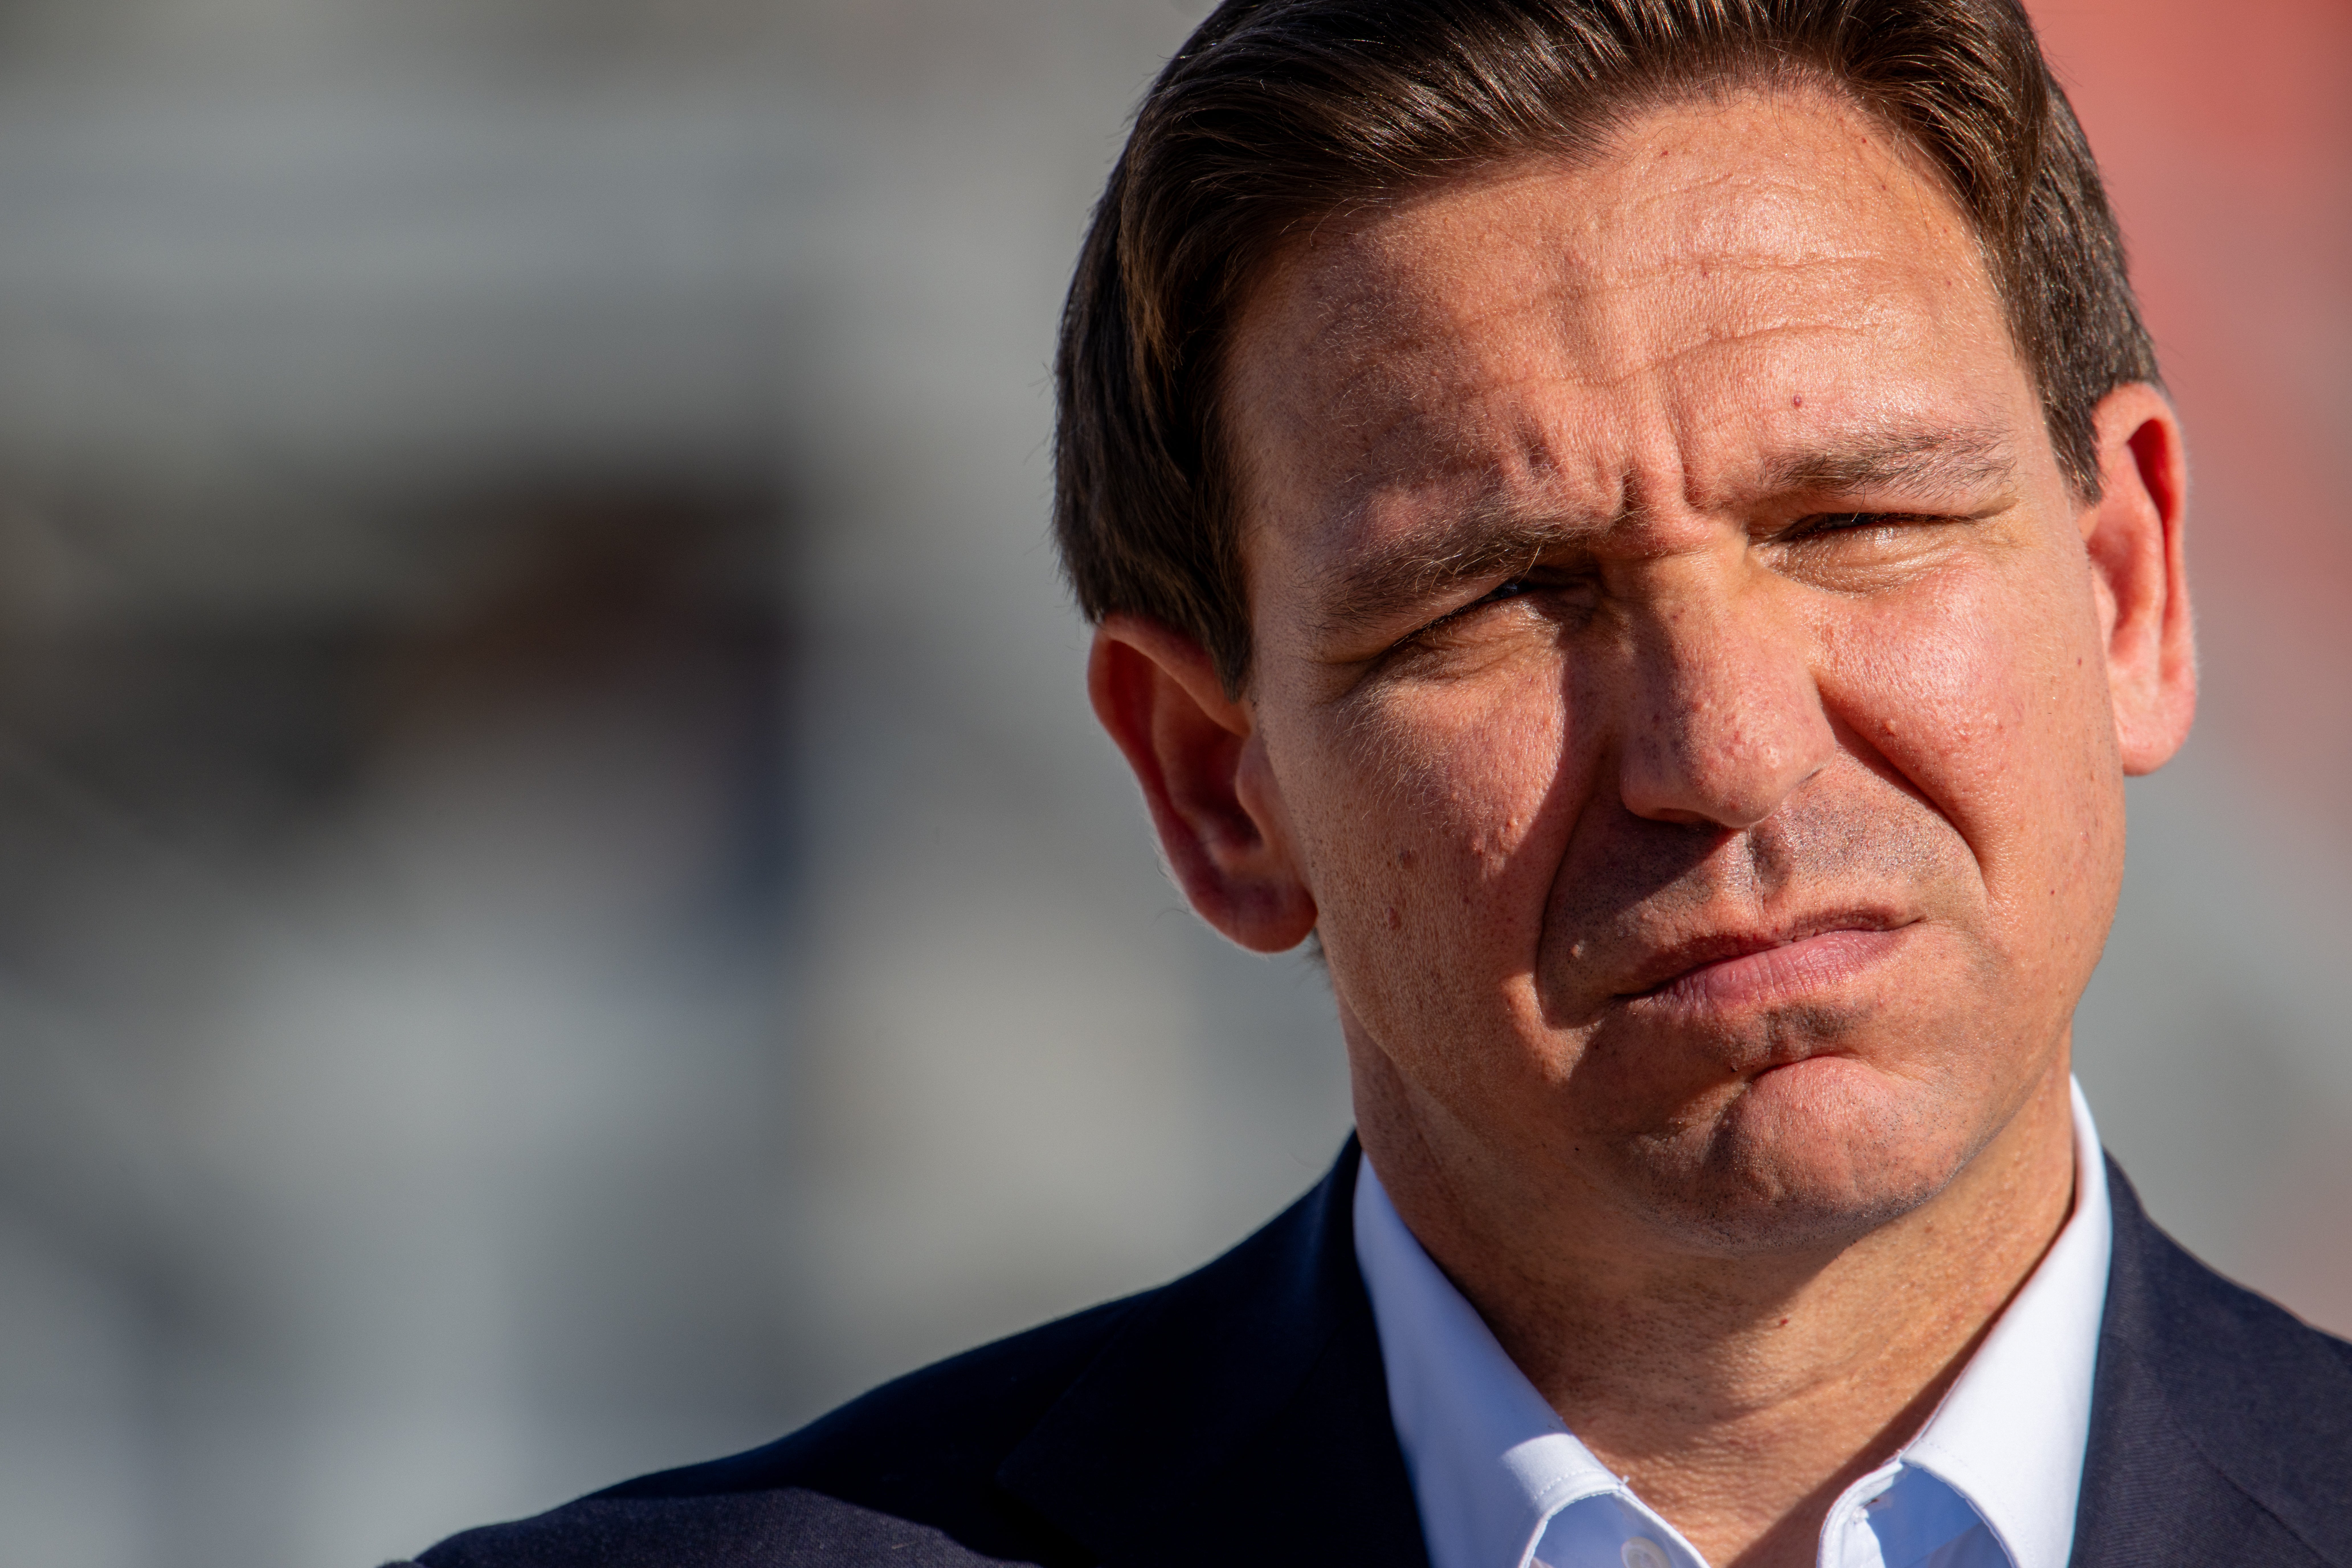 DeSantis signed legislation that banned union dues from being automatically taken from paychecks to fund teachers’ and public employees’ unions